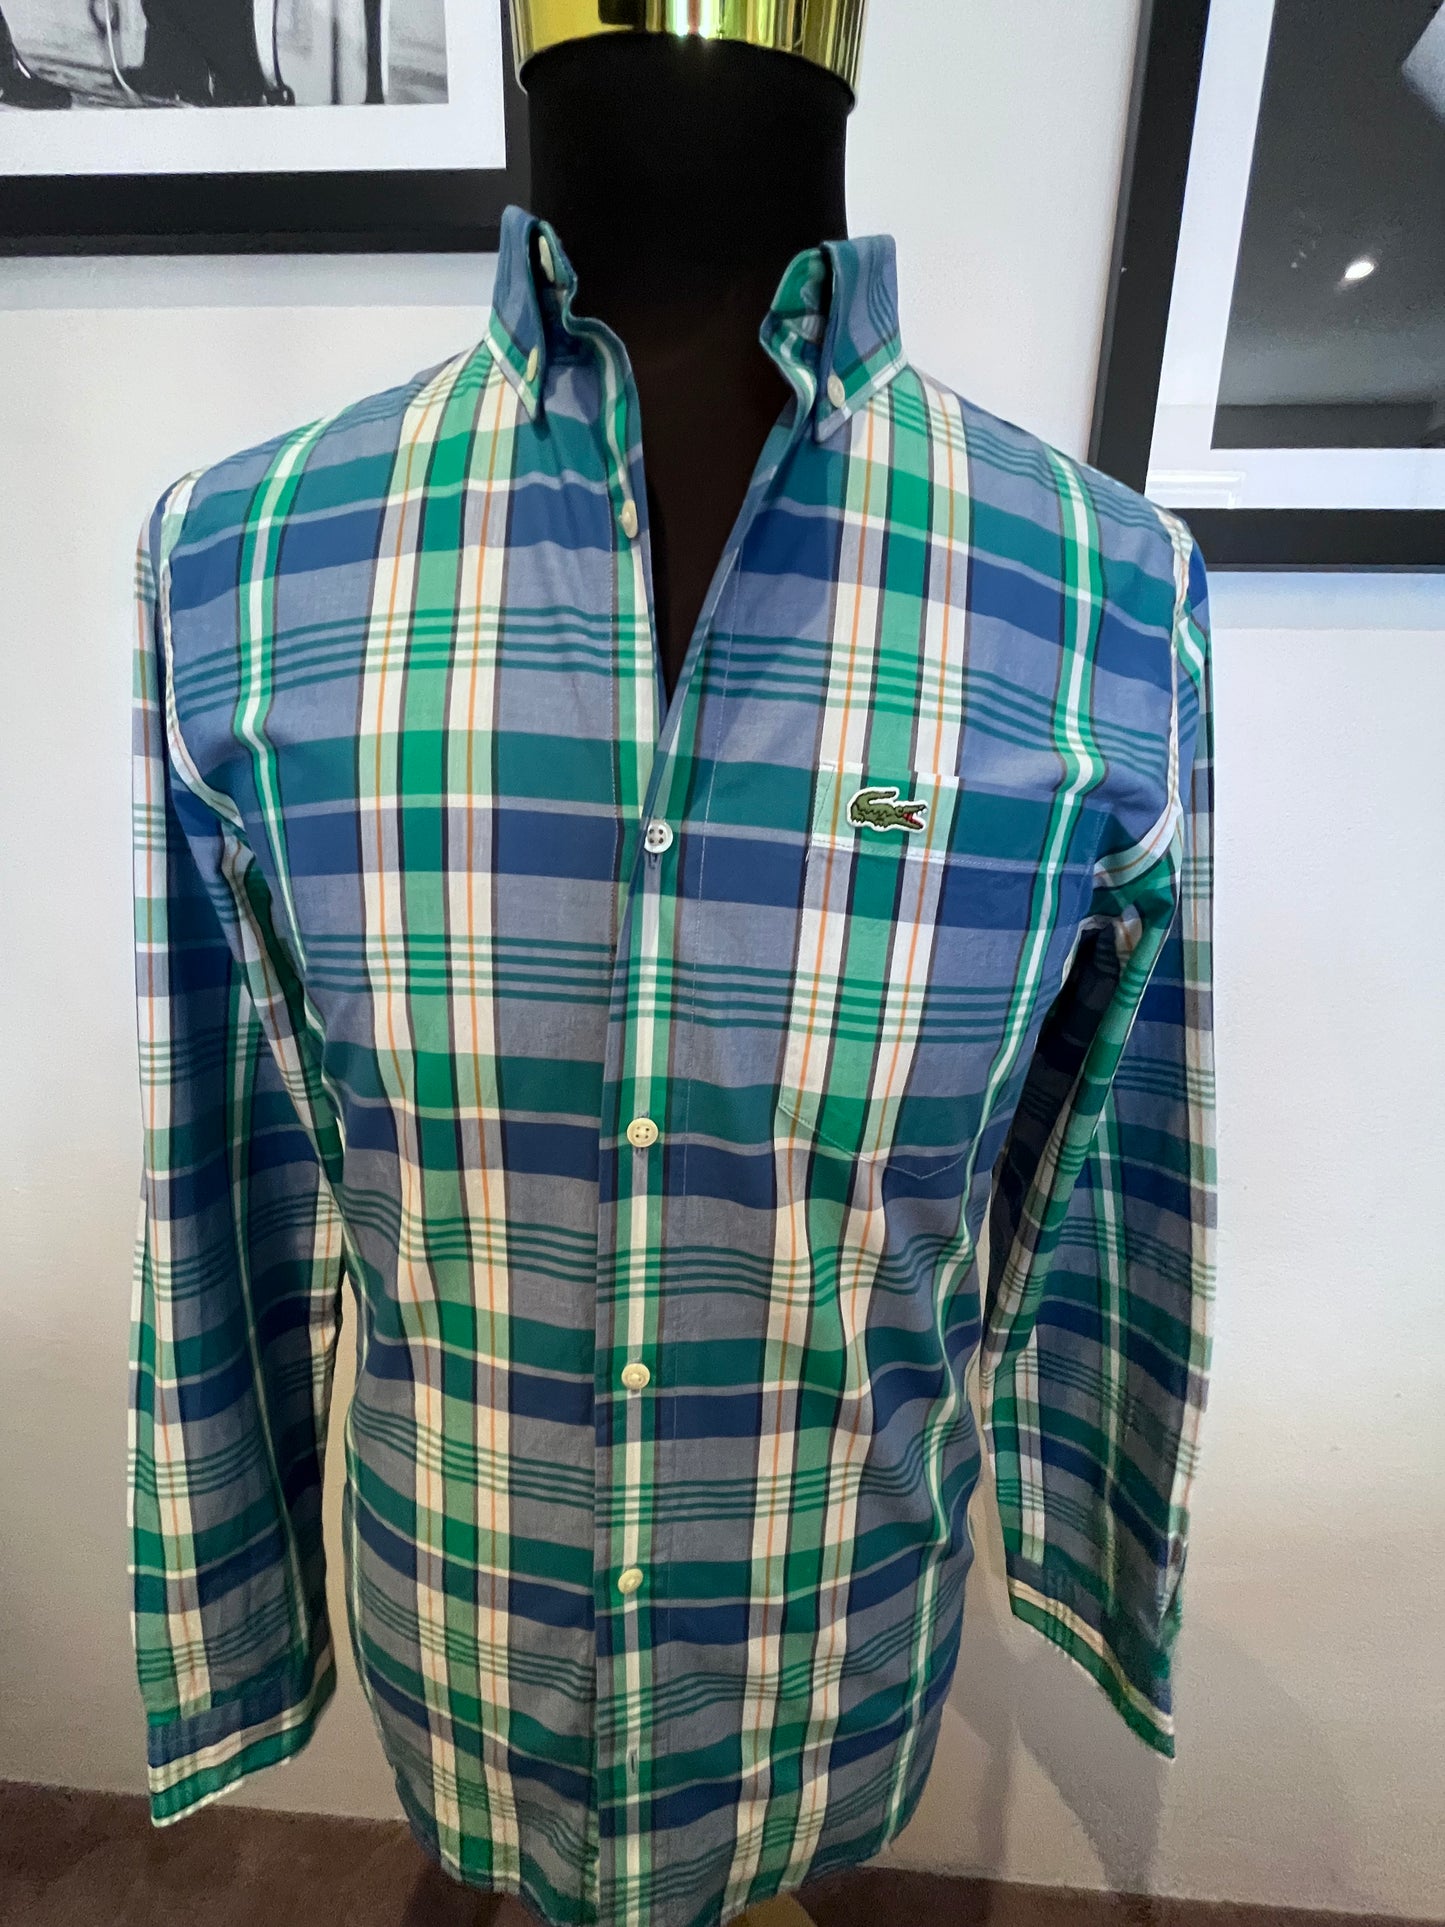 Lacoste 100% Cotton Green Blue Check Shirt Size M Classic Fit Button Down Collar